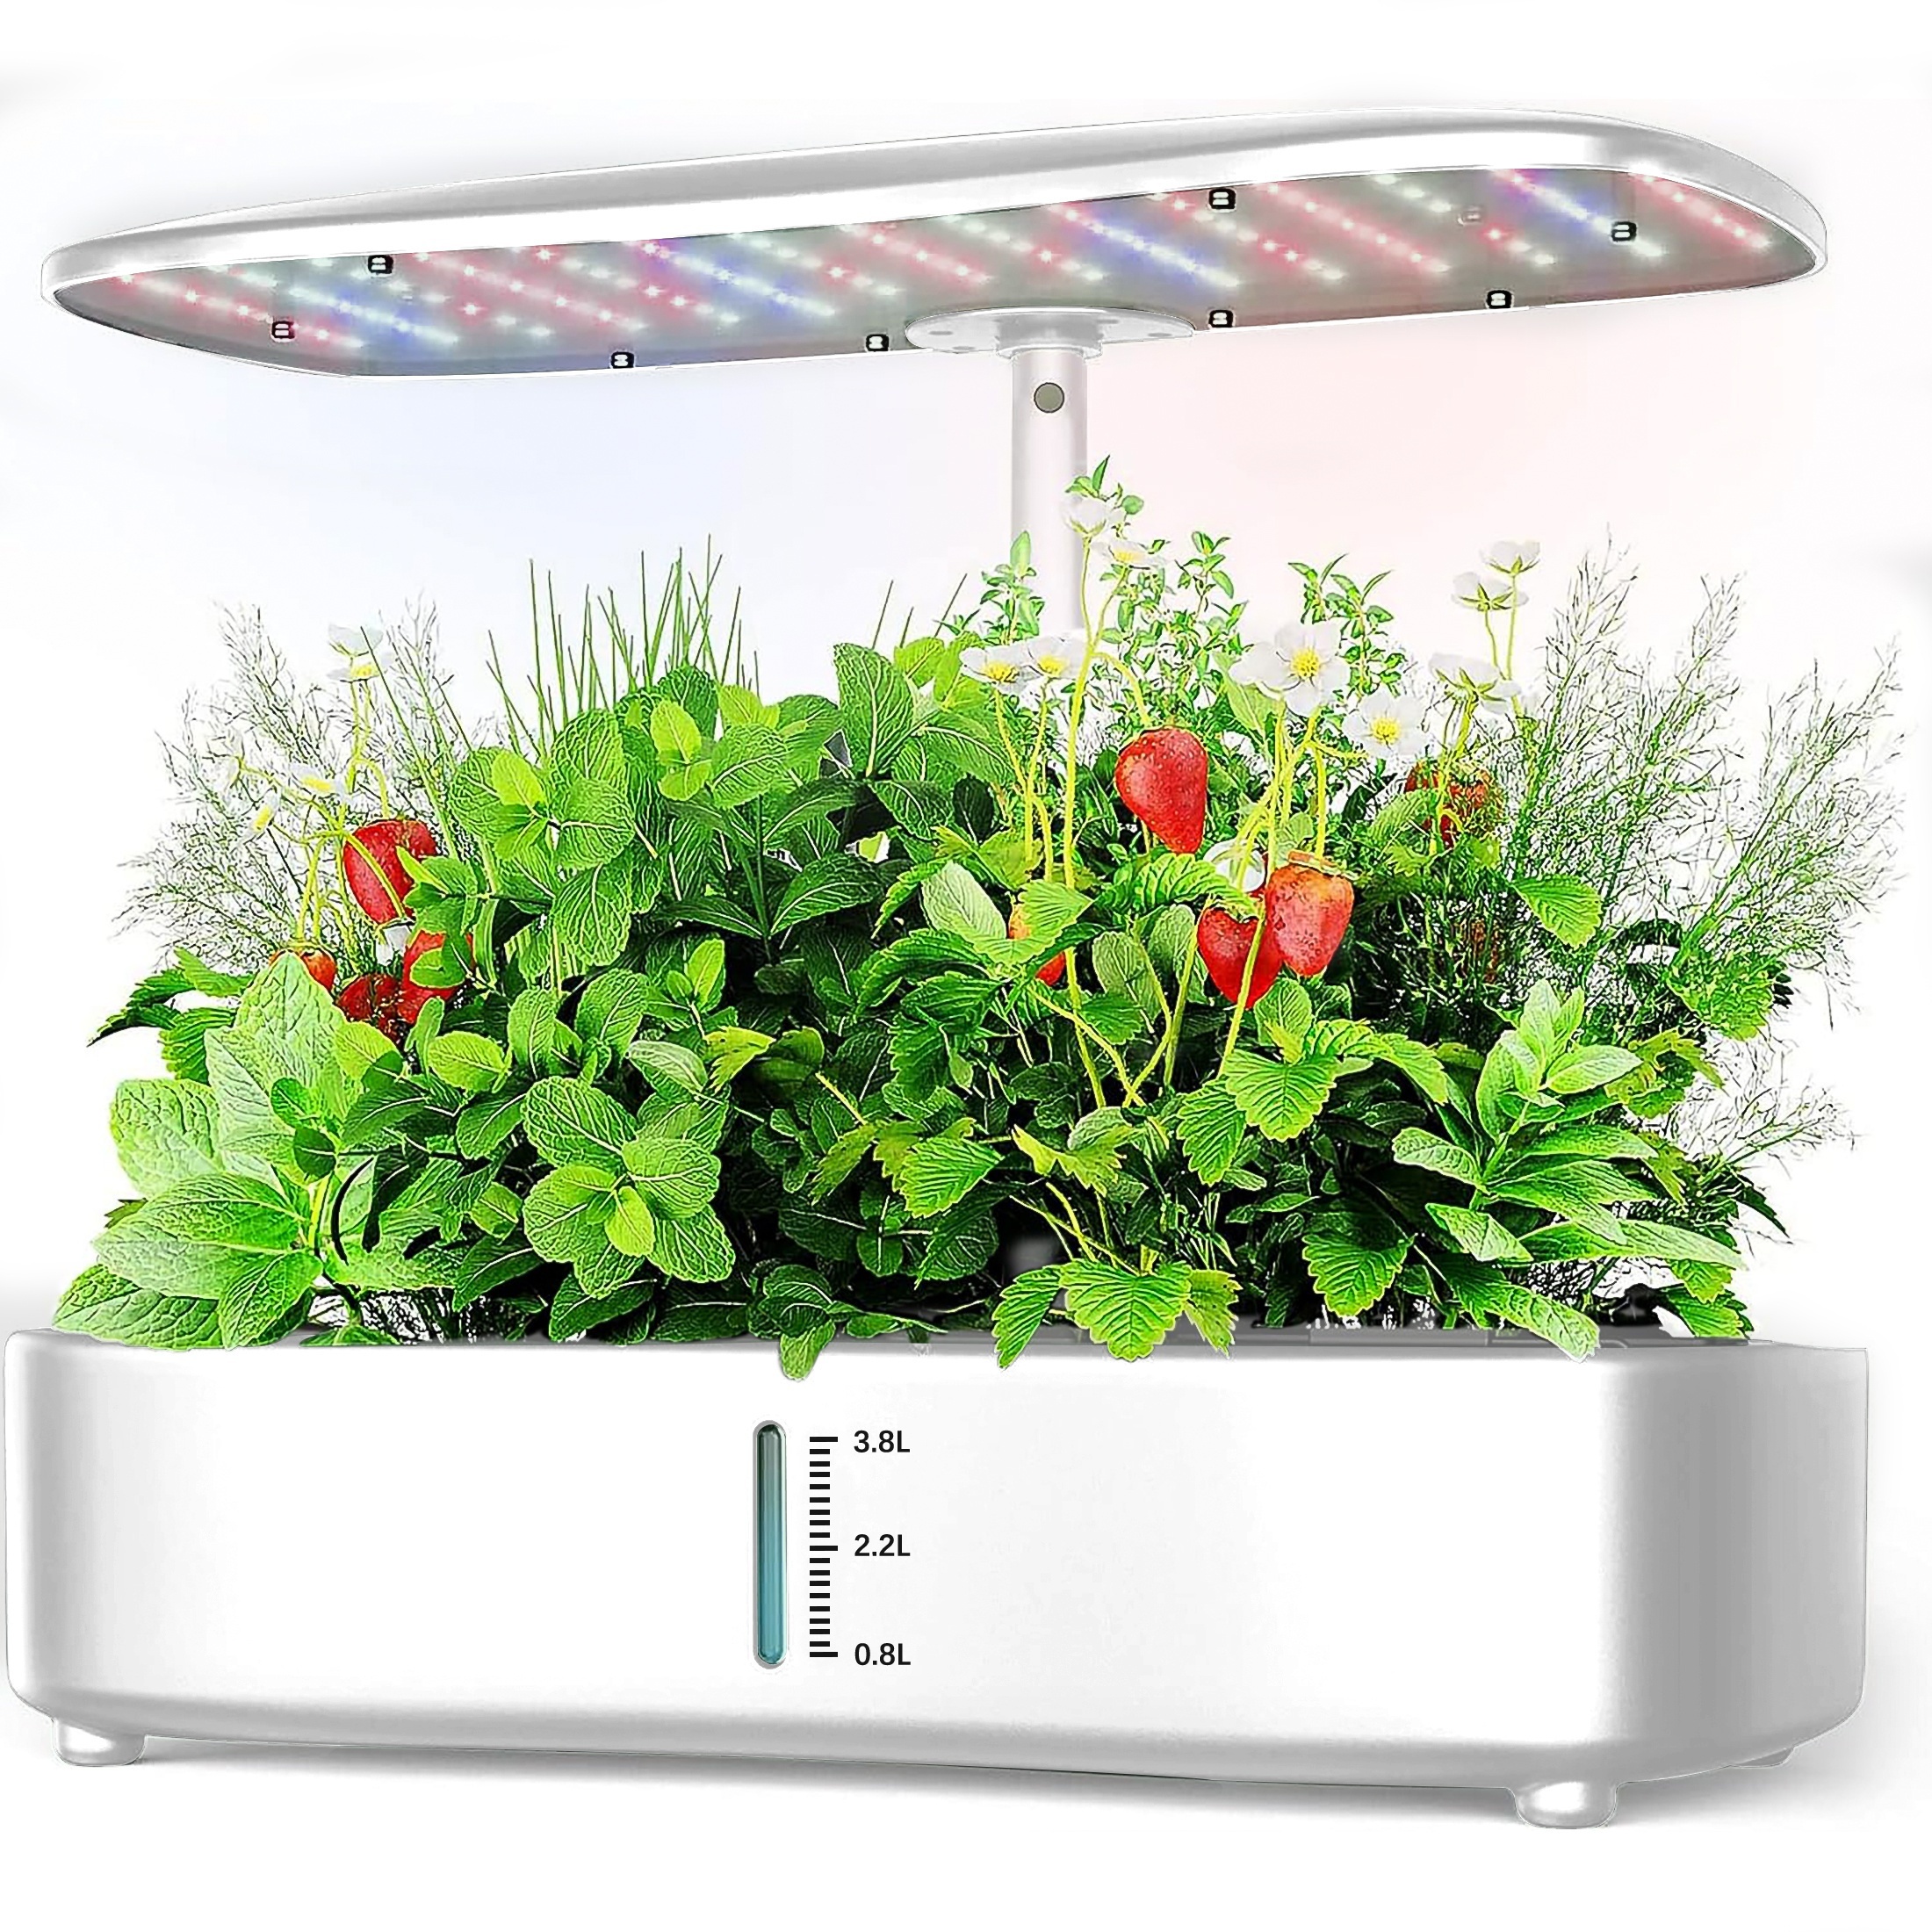 hydroponic growing system indoor hydroponics kit with led plant grow lights plant growing nursery kit with 3 grow modes grow 12 different plants simultaneously height adjustable lampshade automatic water recirculation and timing function